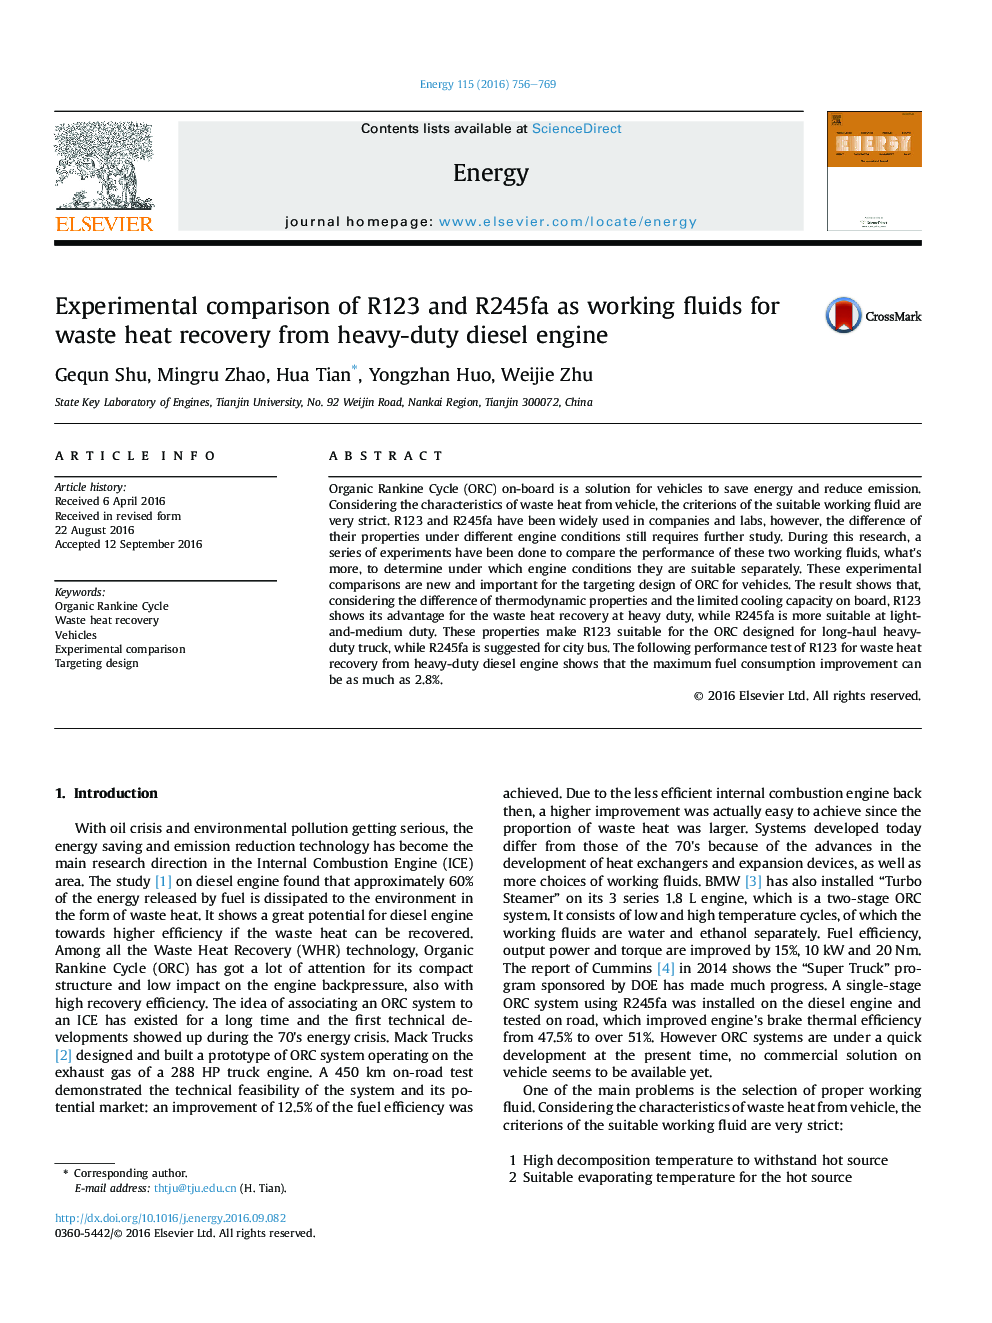 Experimental comparison of R123 and R245fa as working fluids for waste heat recovery from heavy-duty diesel engine